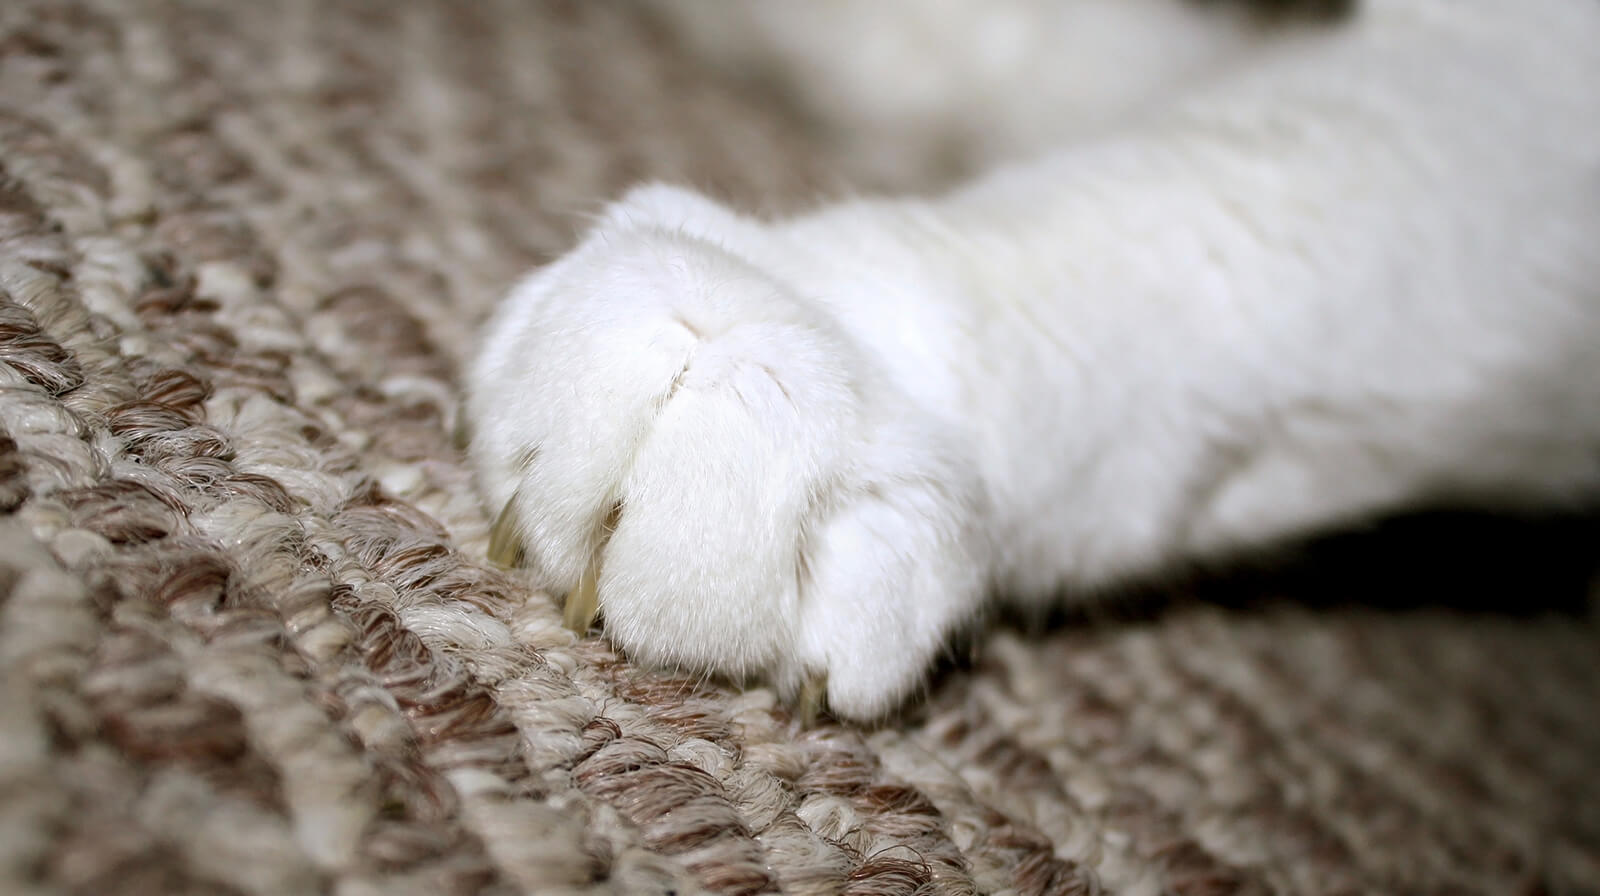 scratching and digging the carpet